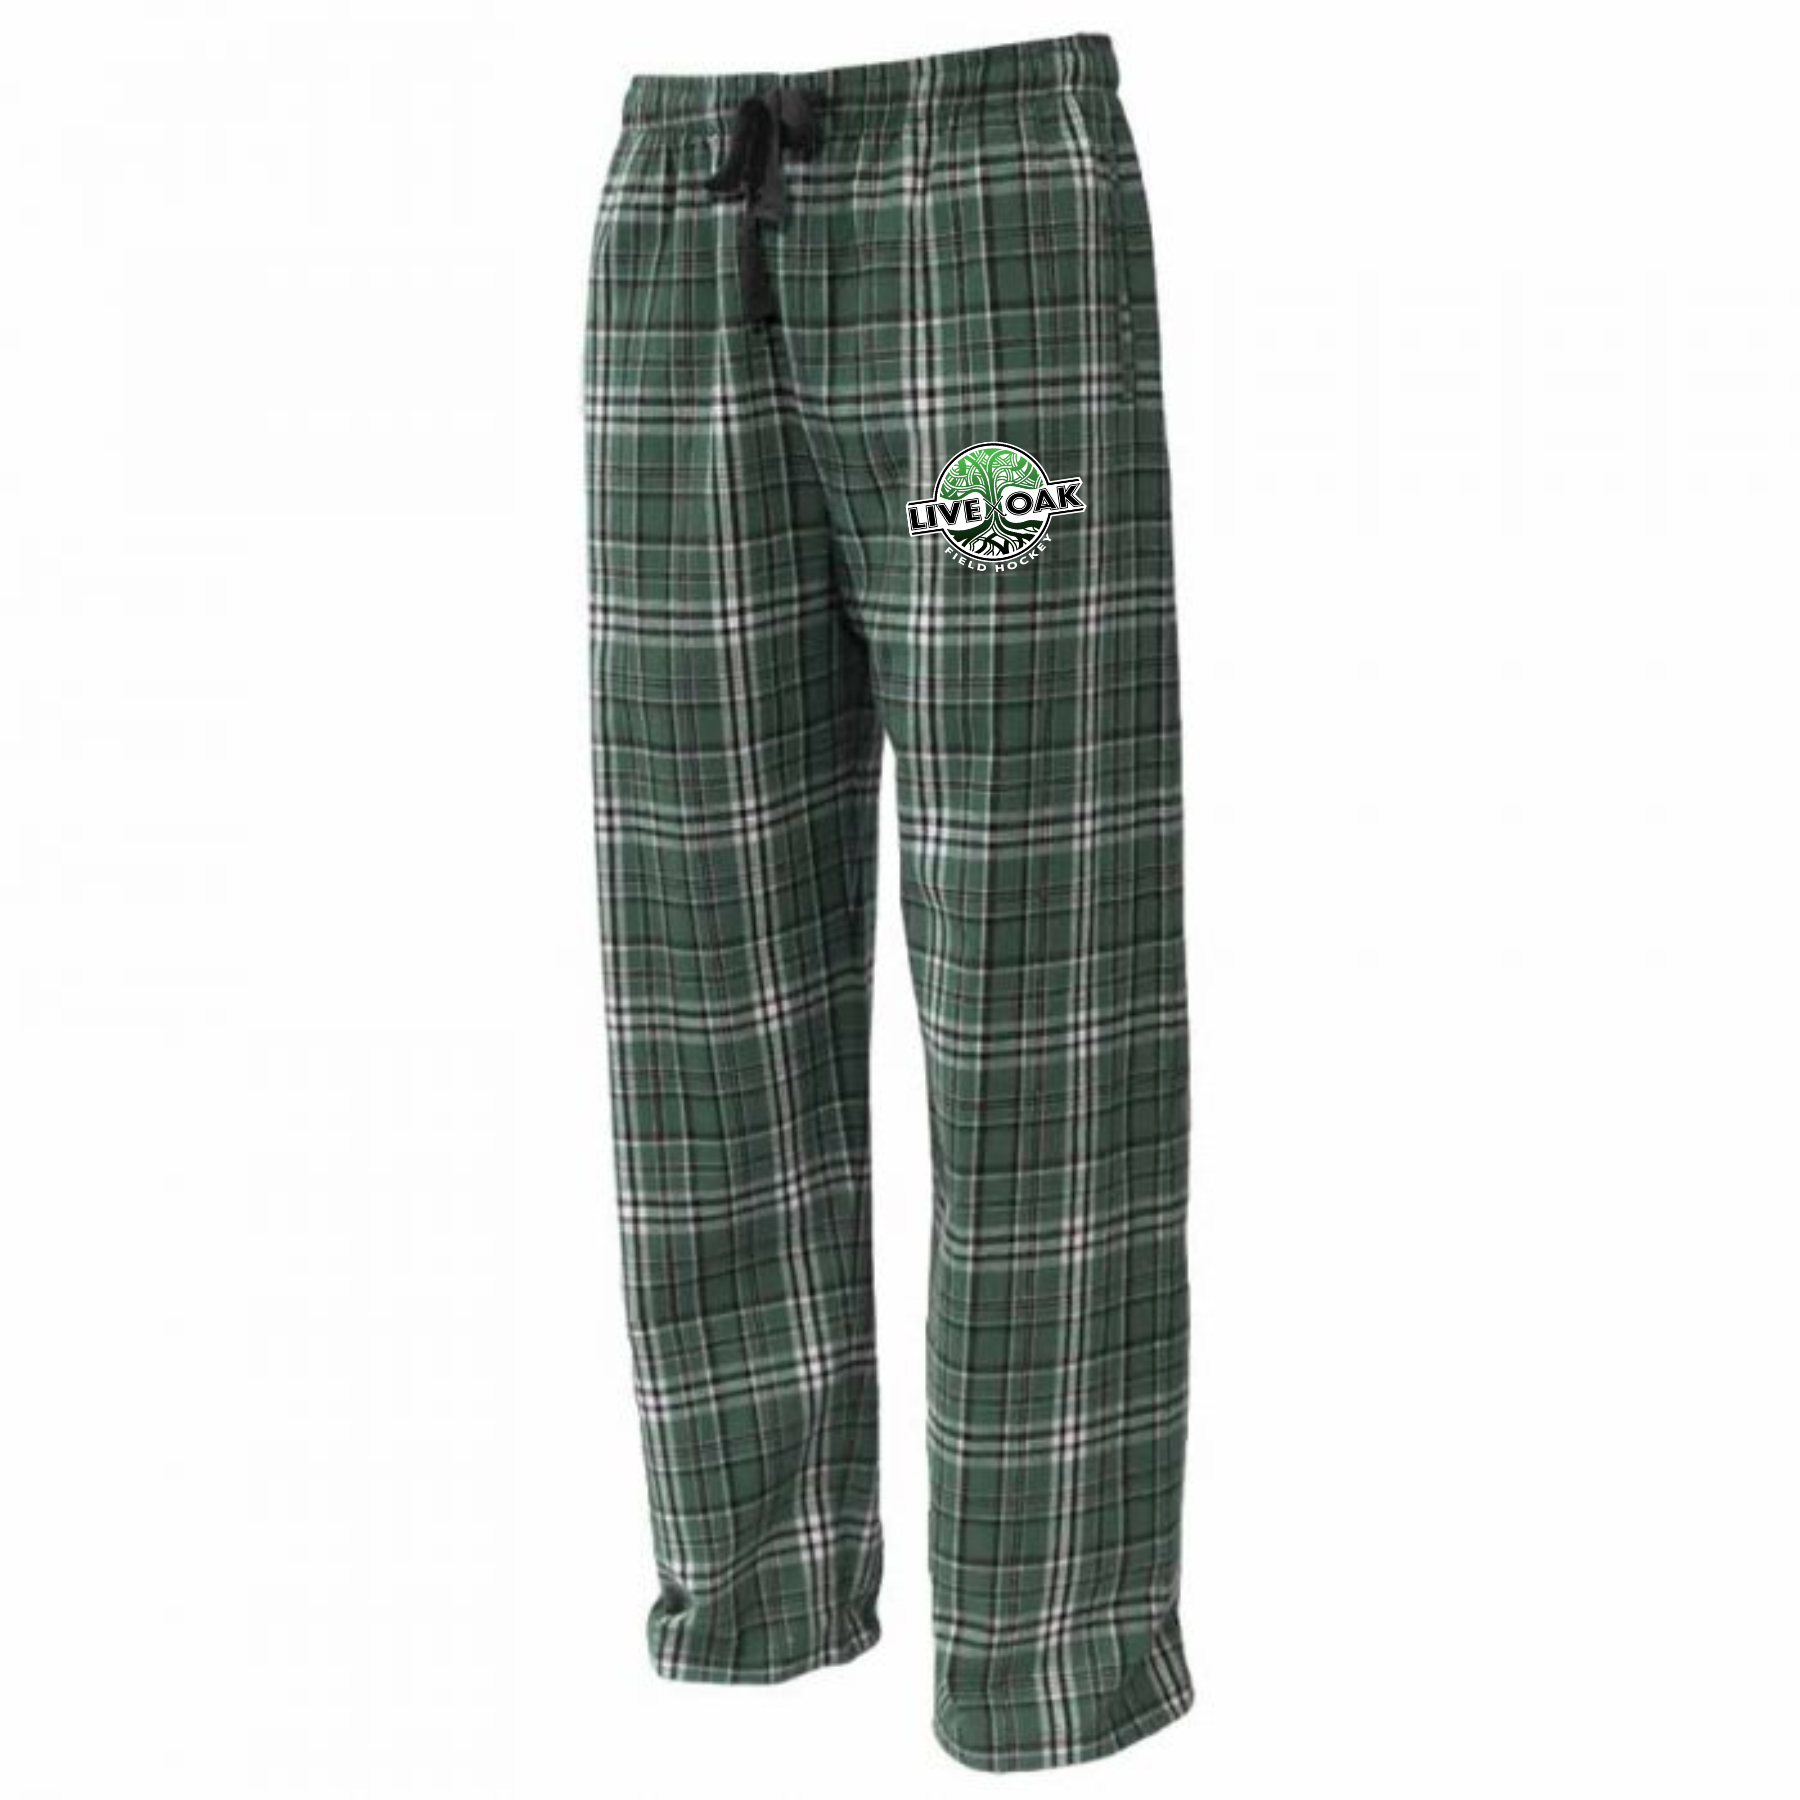 LIVE OAK Flannel Pant Youth-Adult Sizes